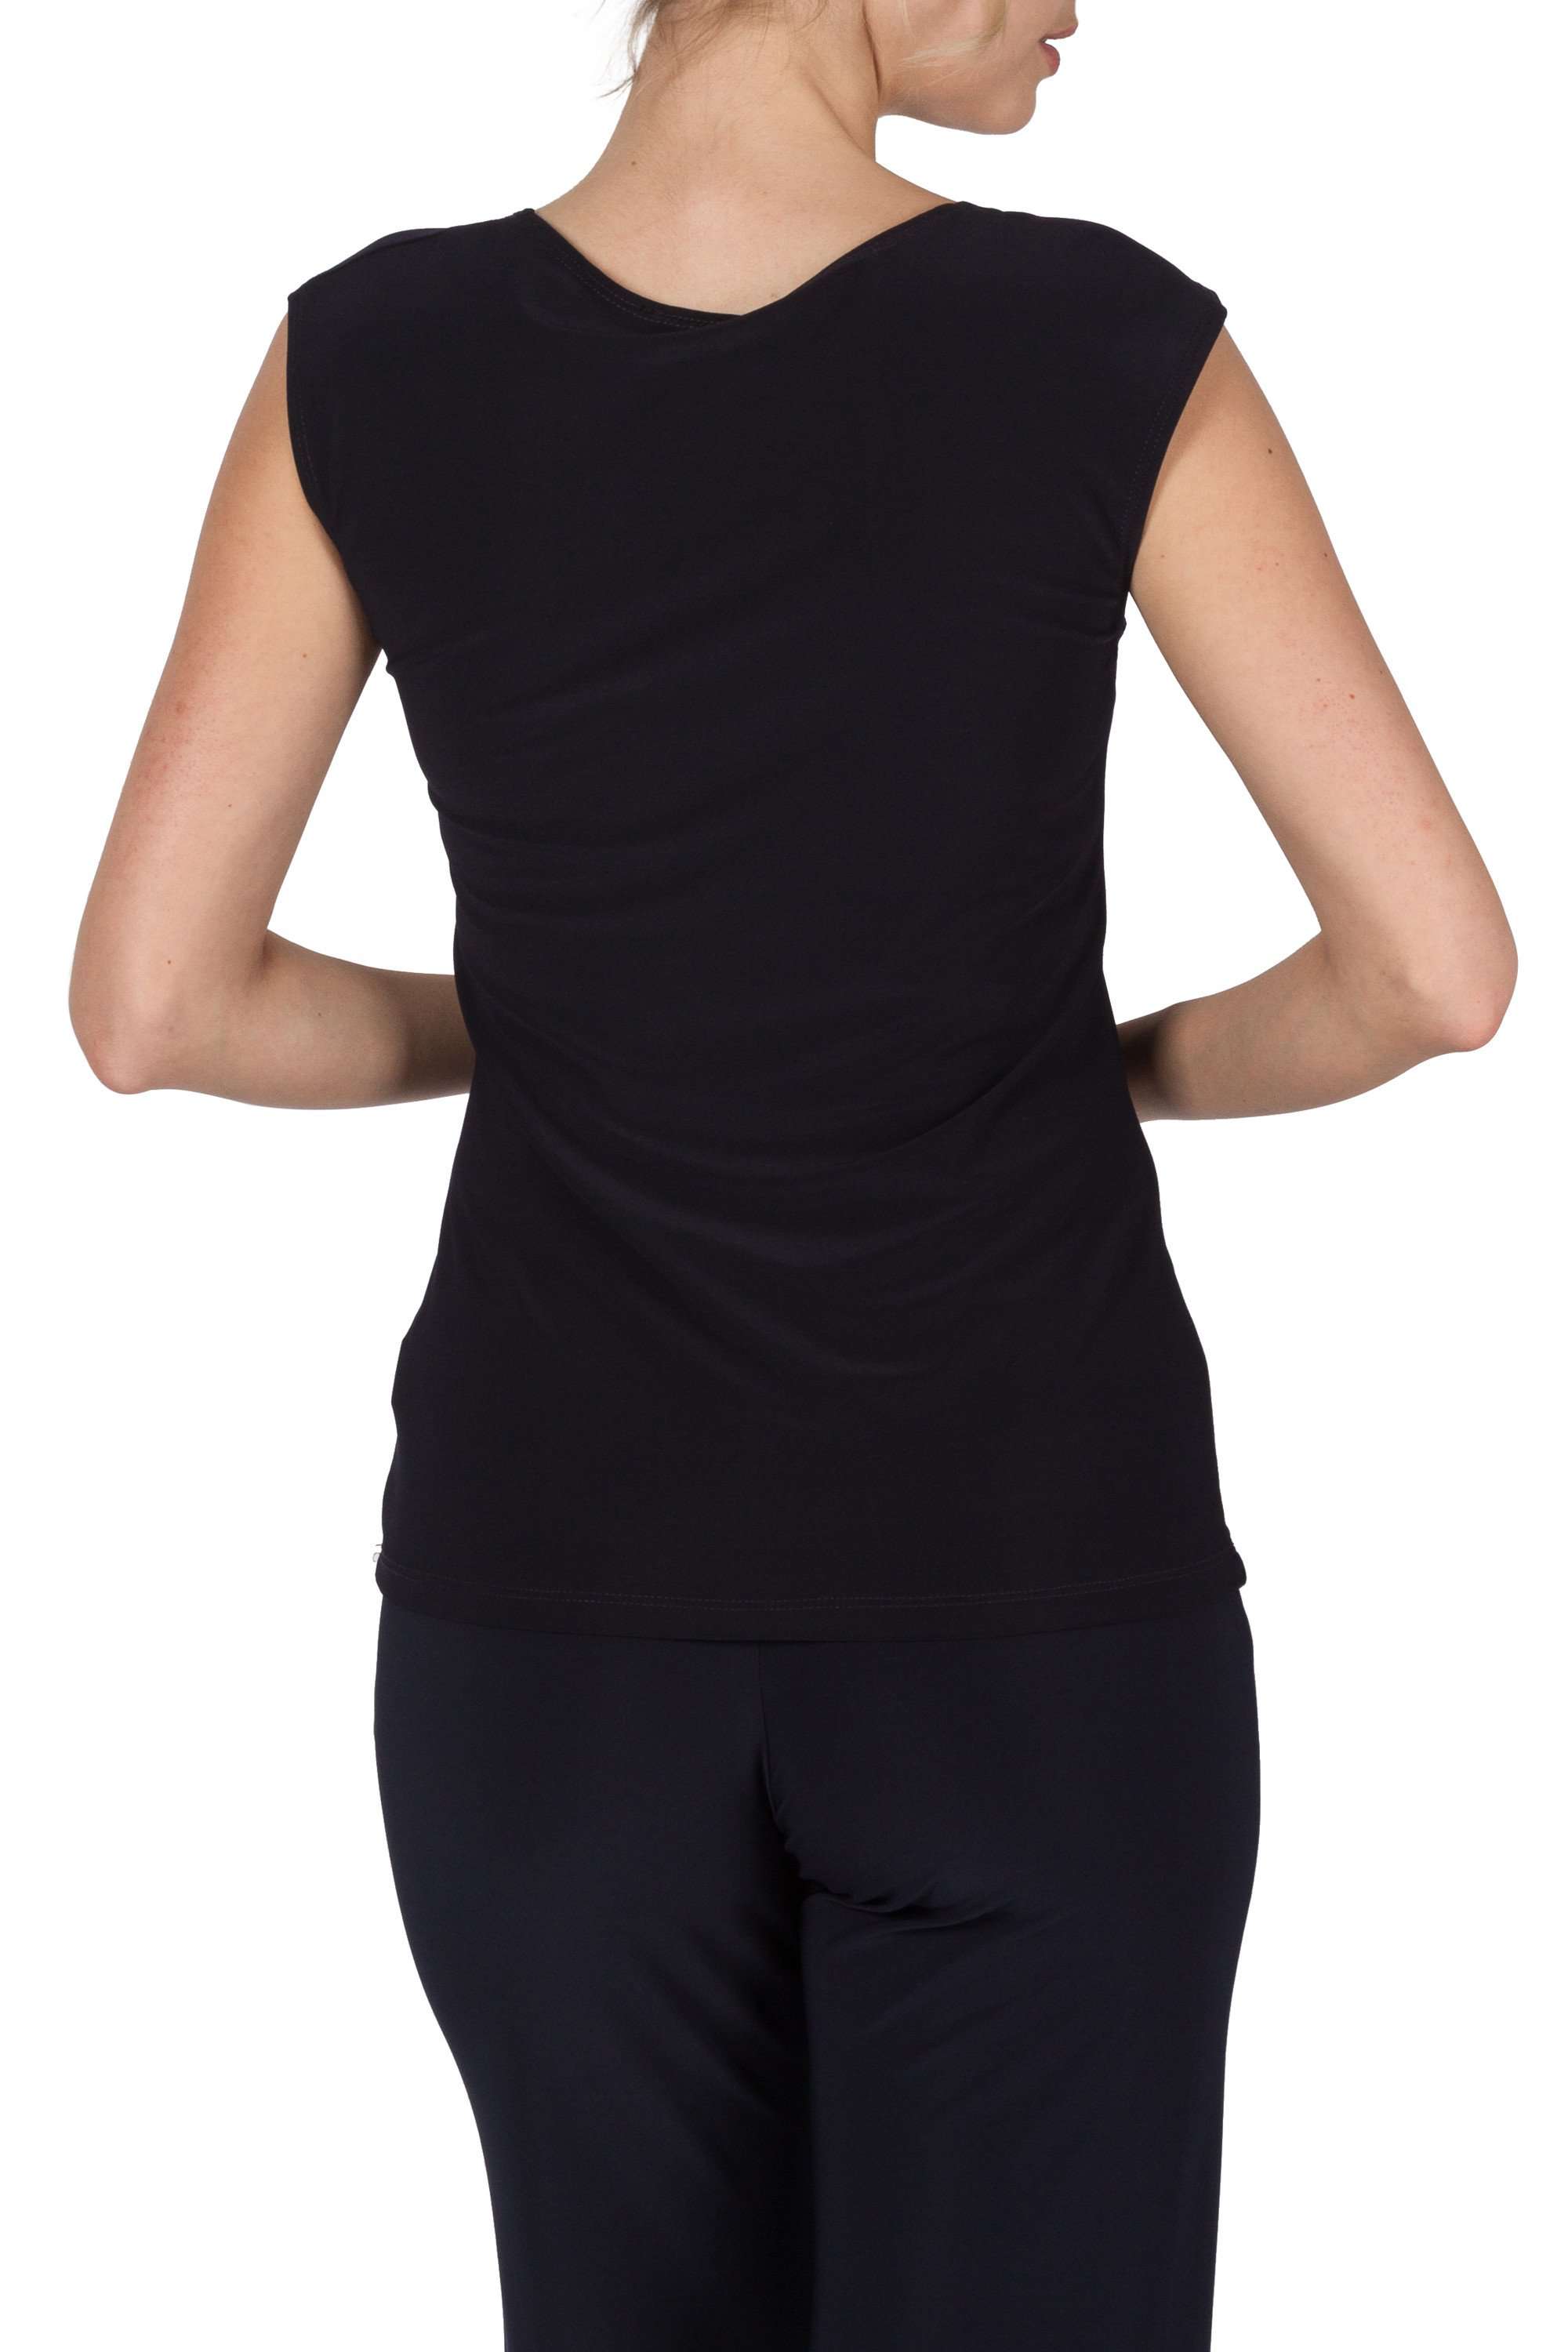 Women's Camisole Navy Square Neck Best Selling Design and Fit Made in Canada - Yvonne Marie - Yvonne Marie